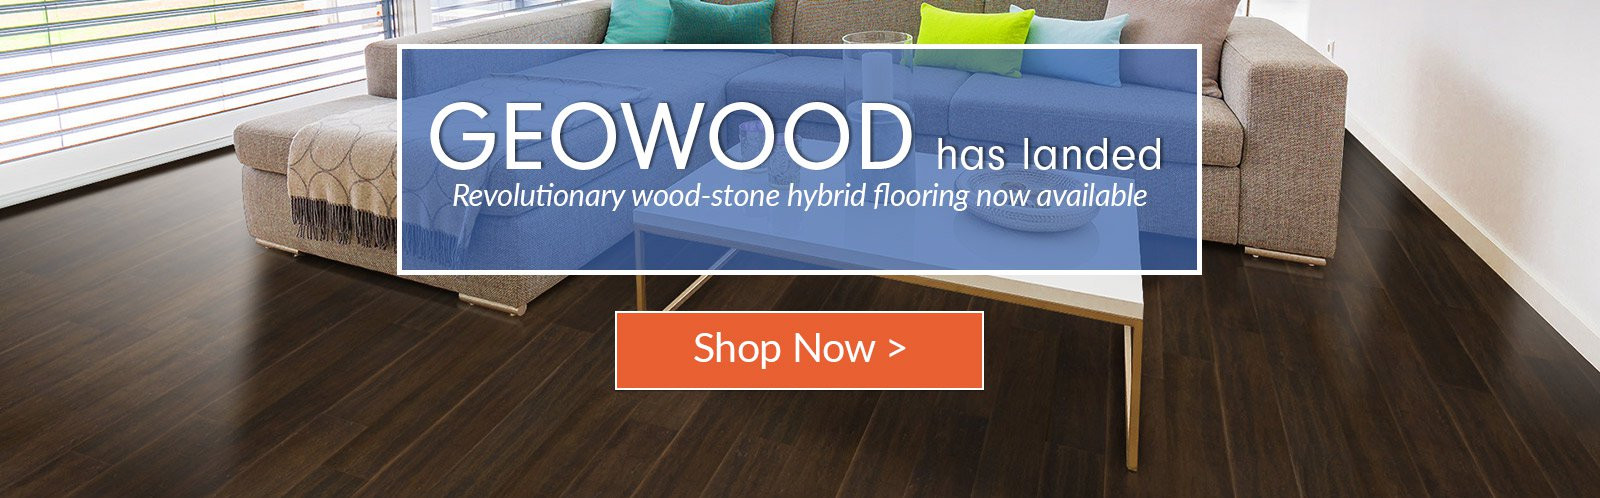 15 attractive Hardwood Flooring Distributors 2024 free download hardwood flooring distributors of green building construction materials and home decor cali bamboo within geowood launch homepage slider